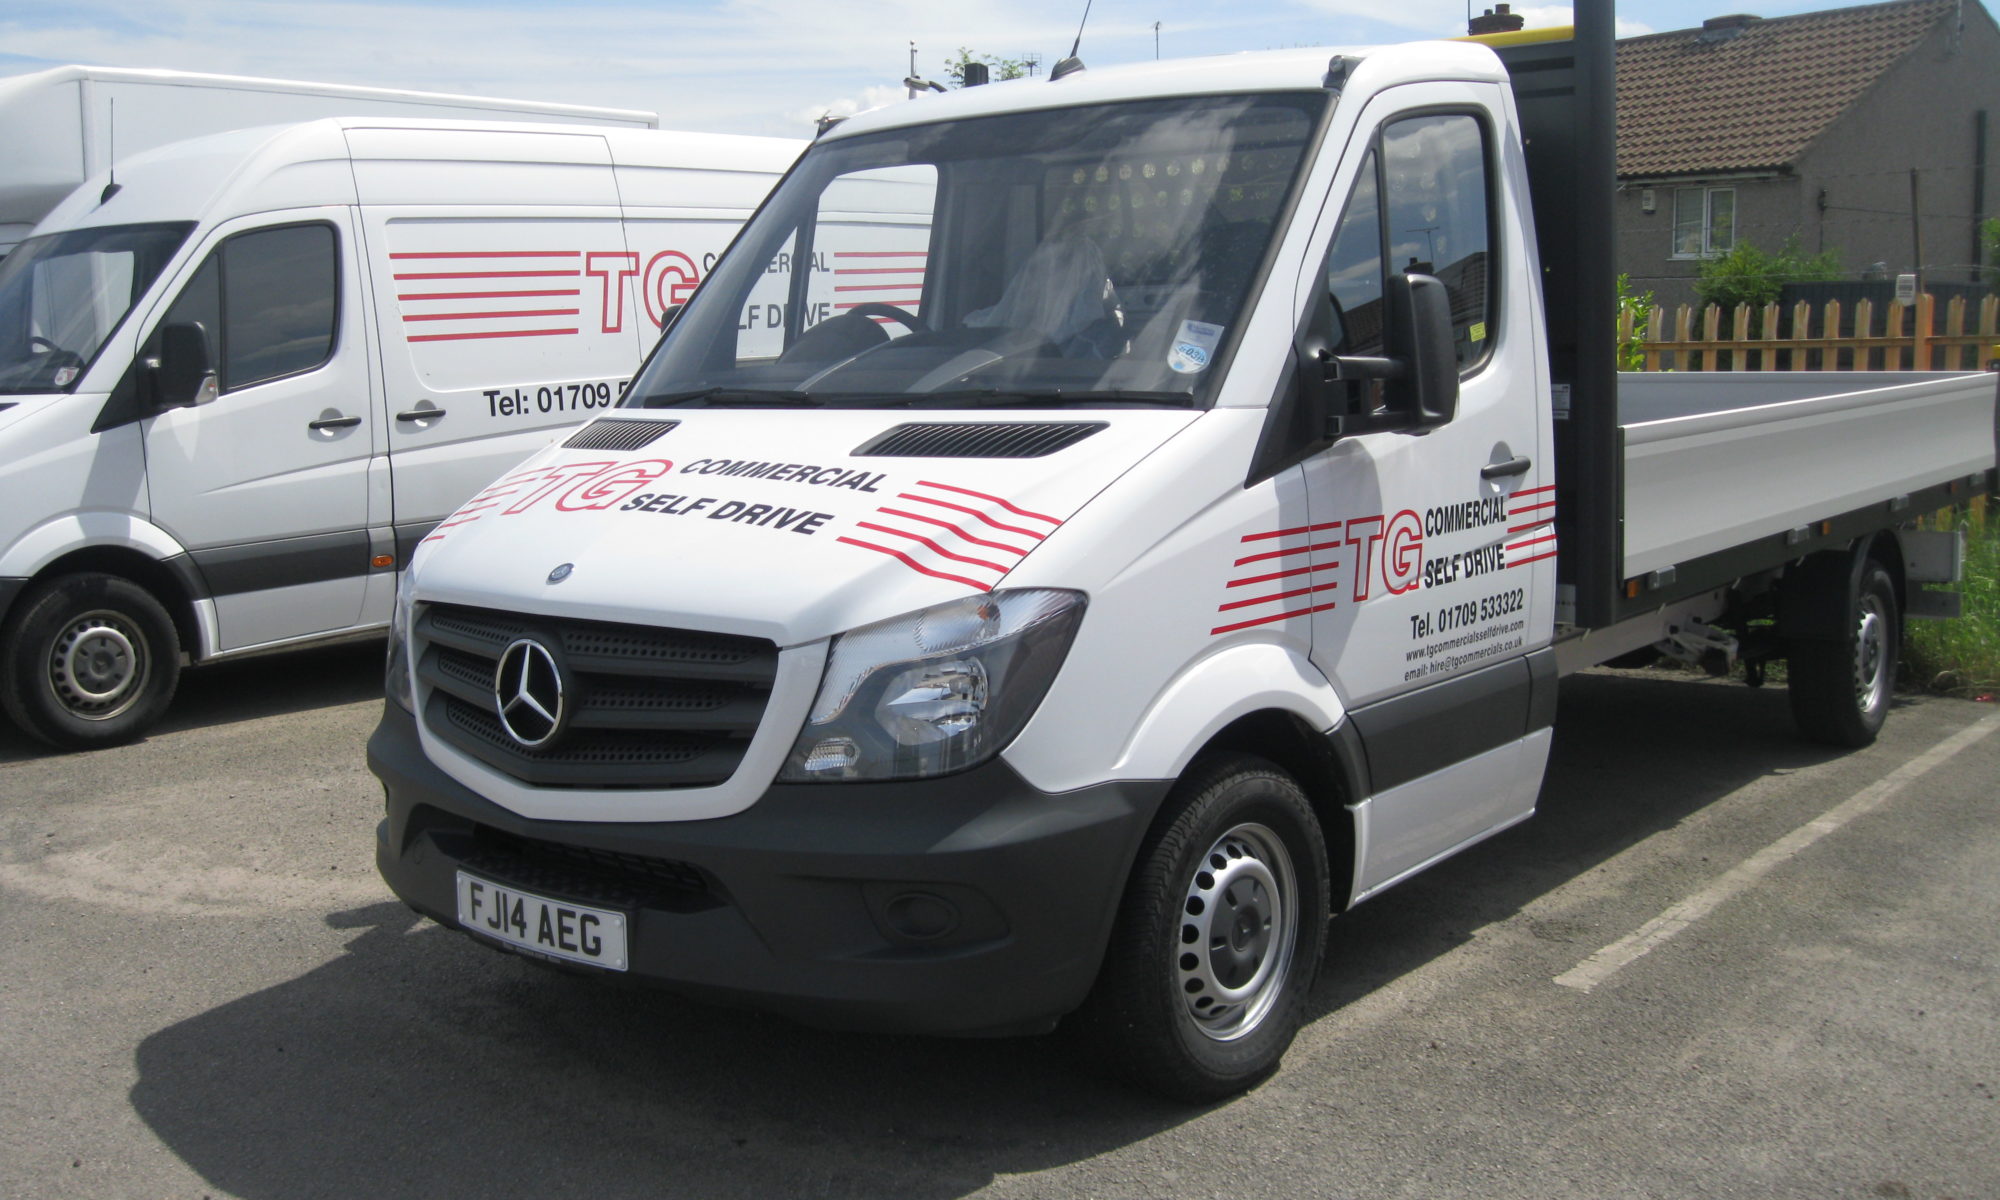 What are the reasons to hire a transit van?